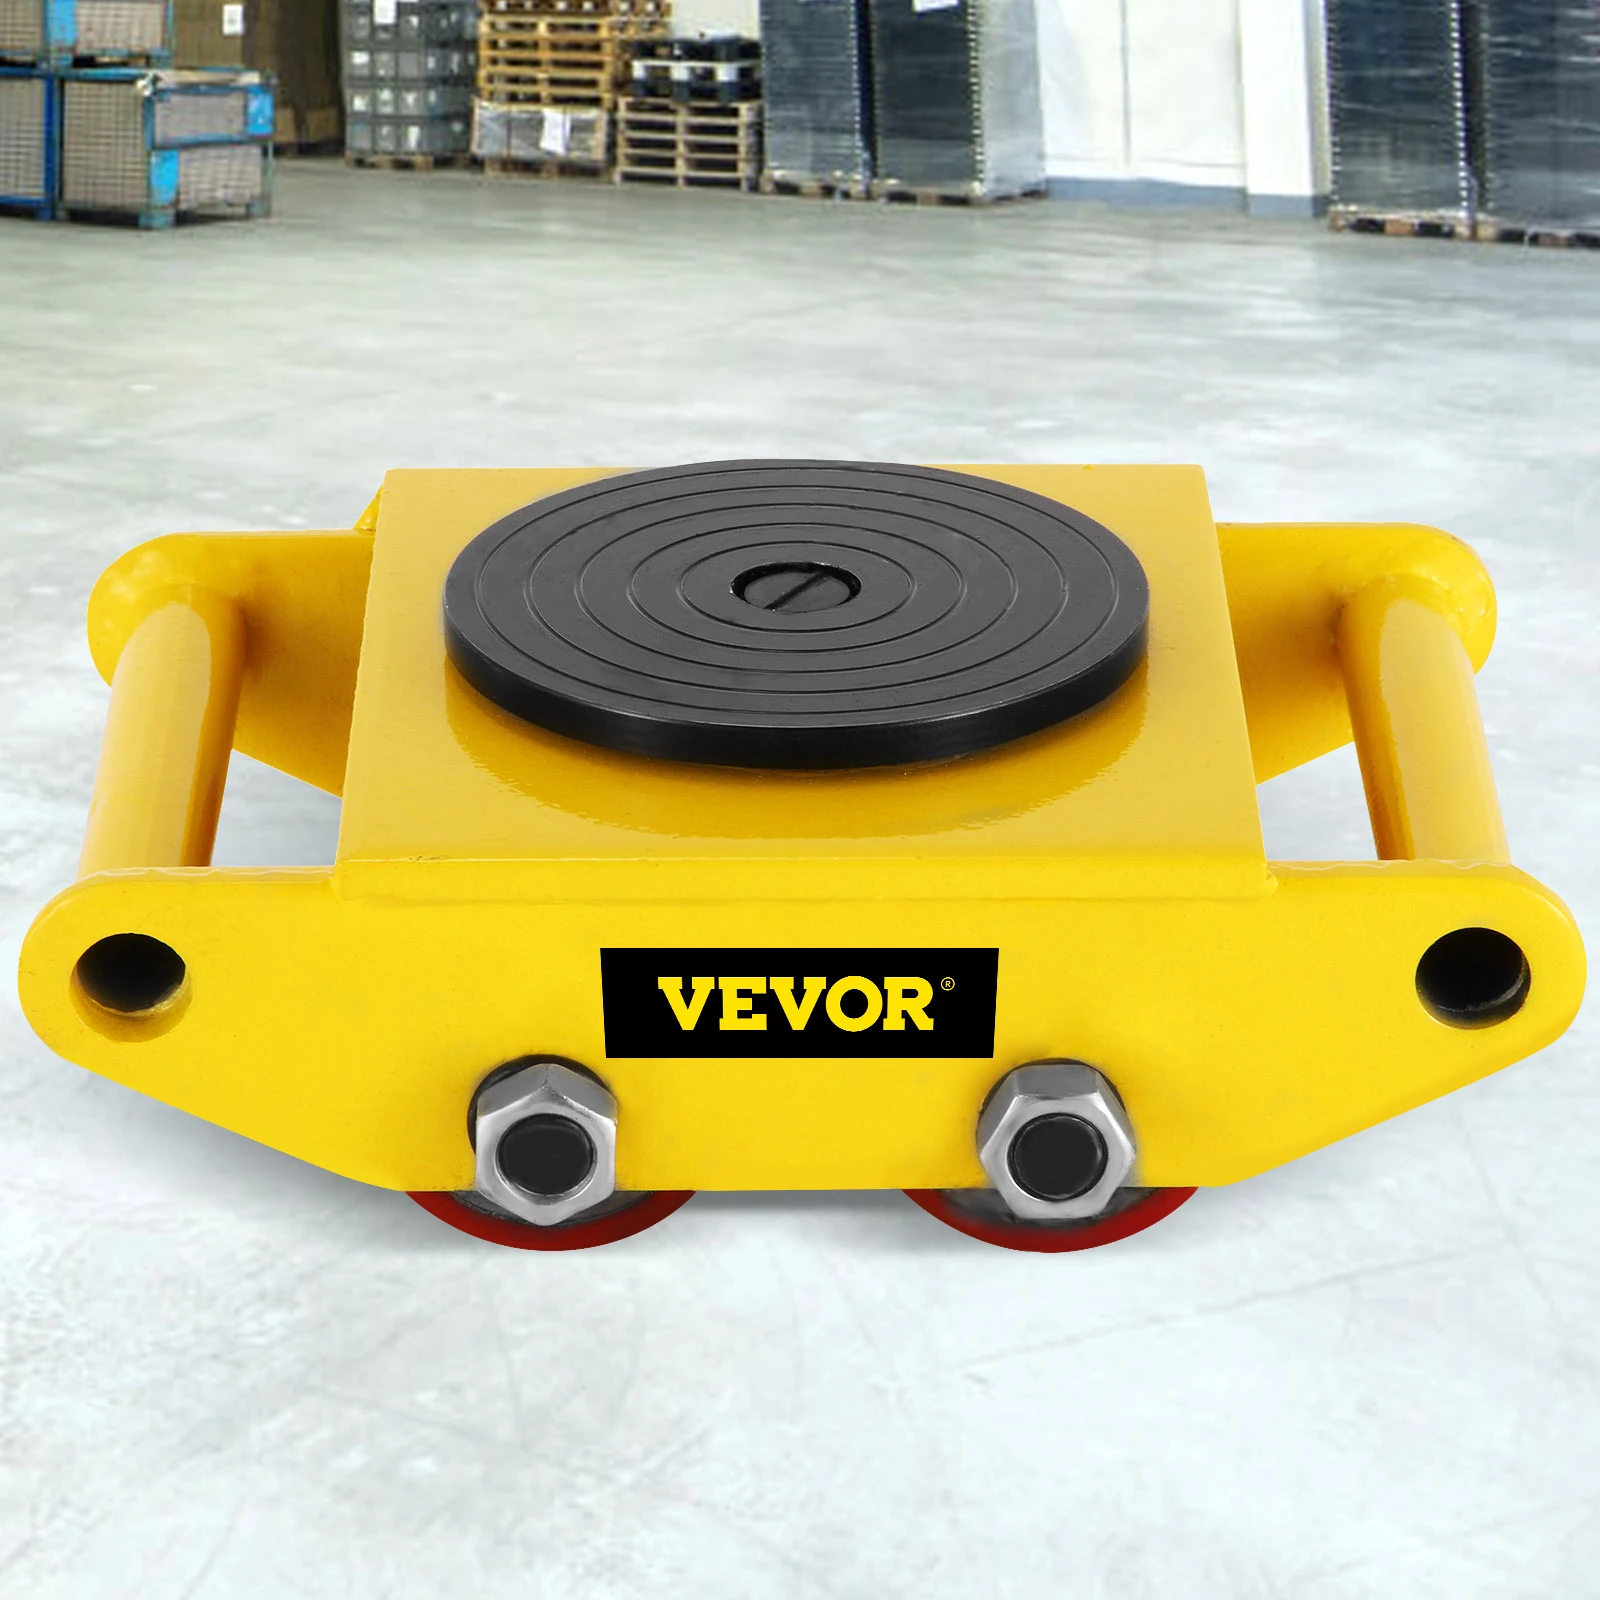 

VEVOR All-Steel Industrial Machinery Mover Pallet Trolley 6T Small Carrying Tank With 360 Degree Rotation for Transporting Cargo